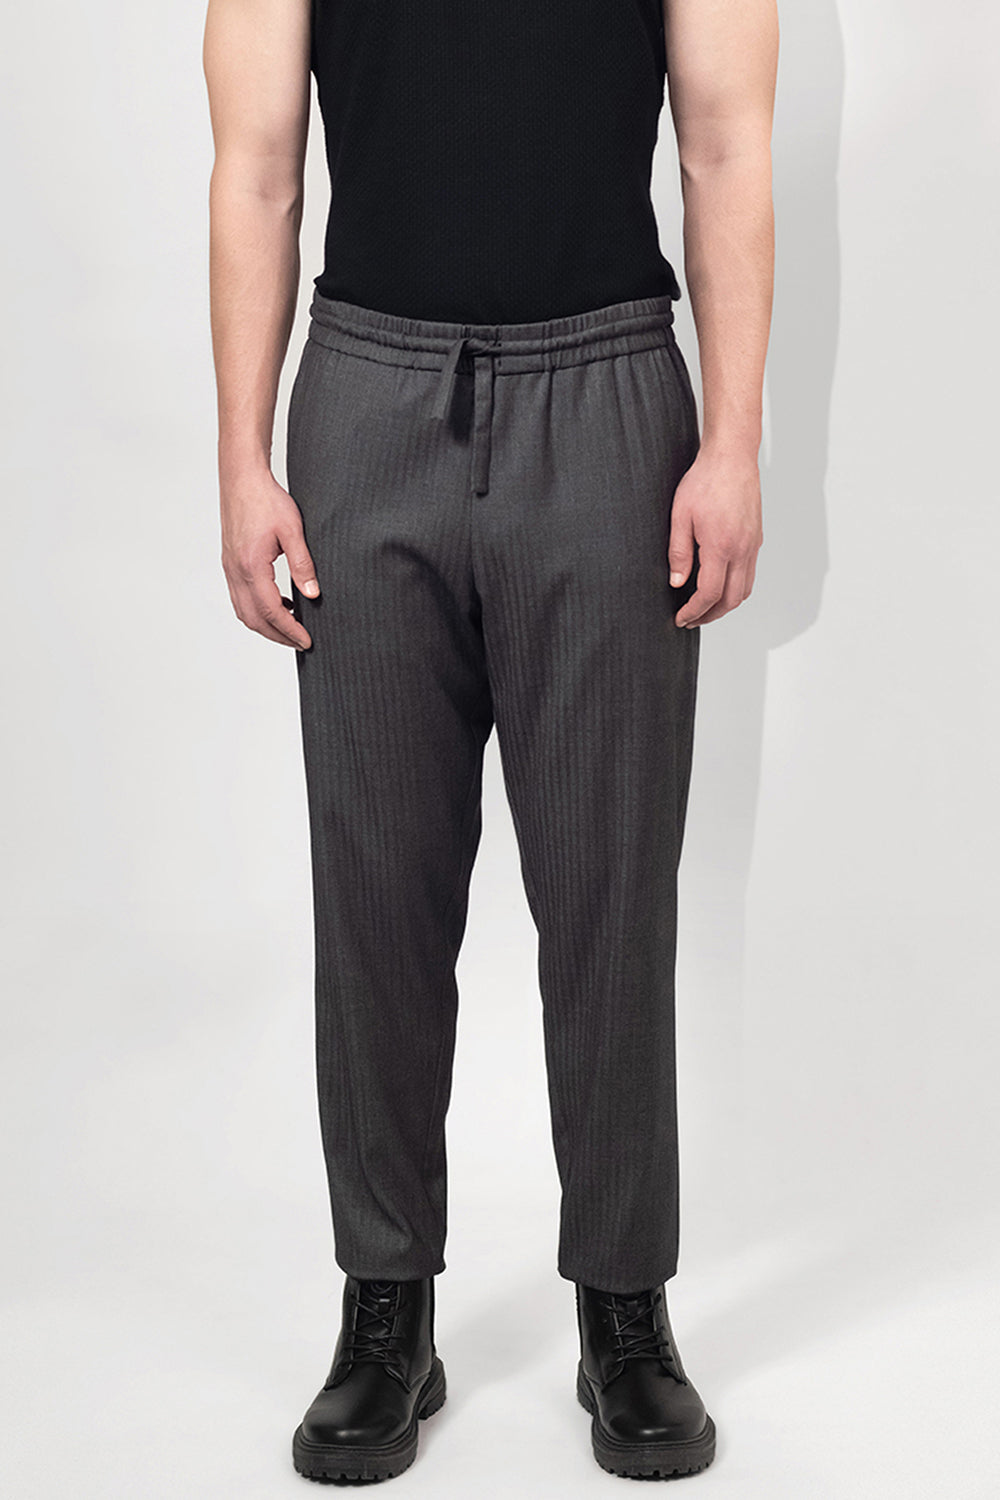 SEANNUNG - MEN - Tailored Trousers with Elastic Waist  直條鬆緊西裝窄褲